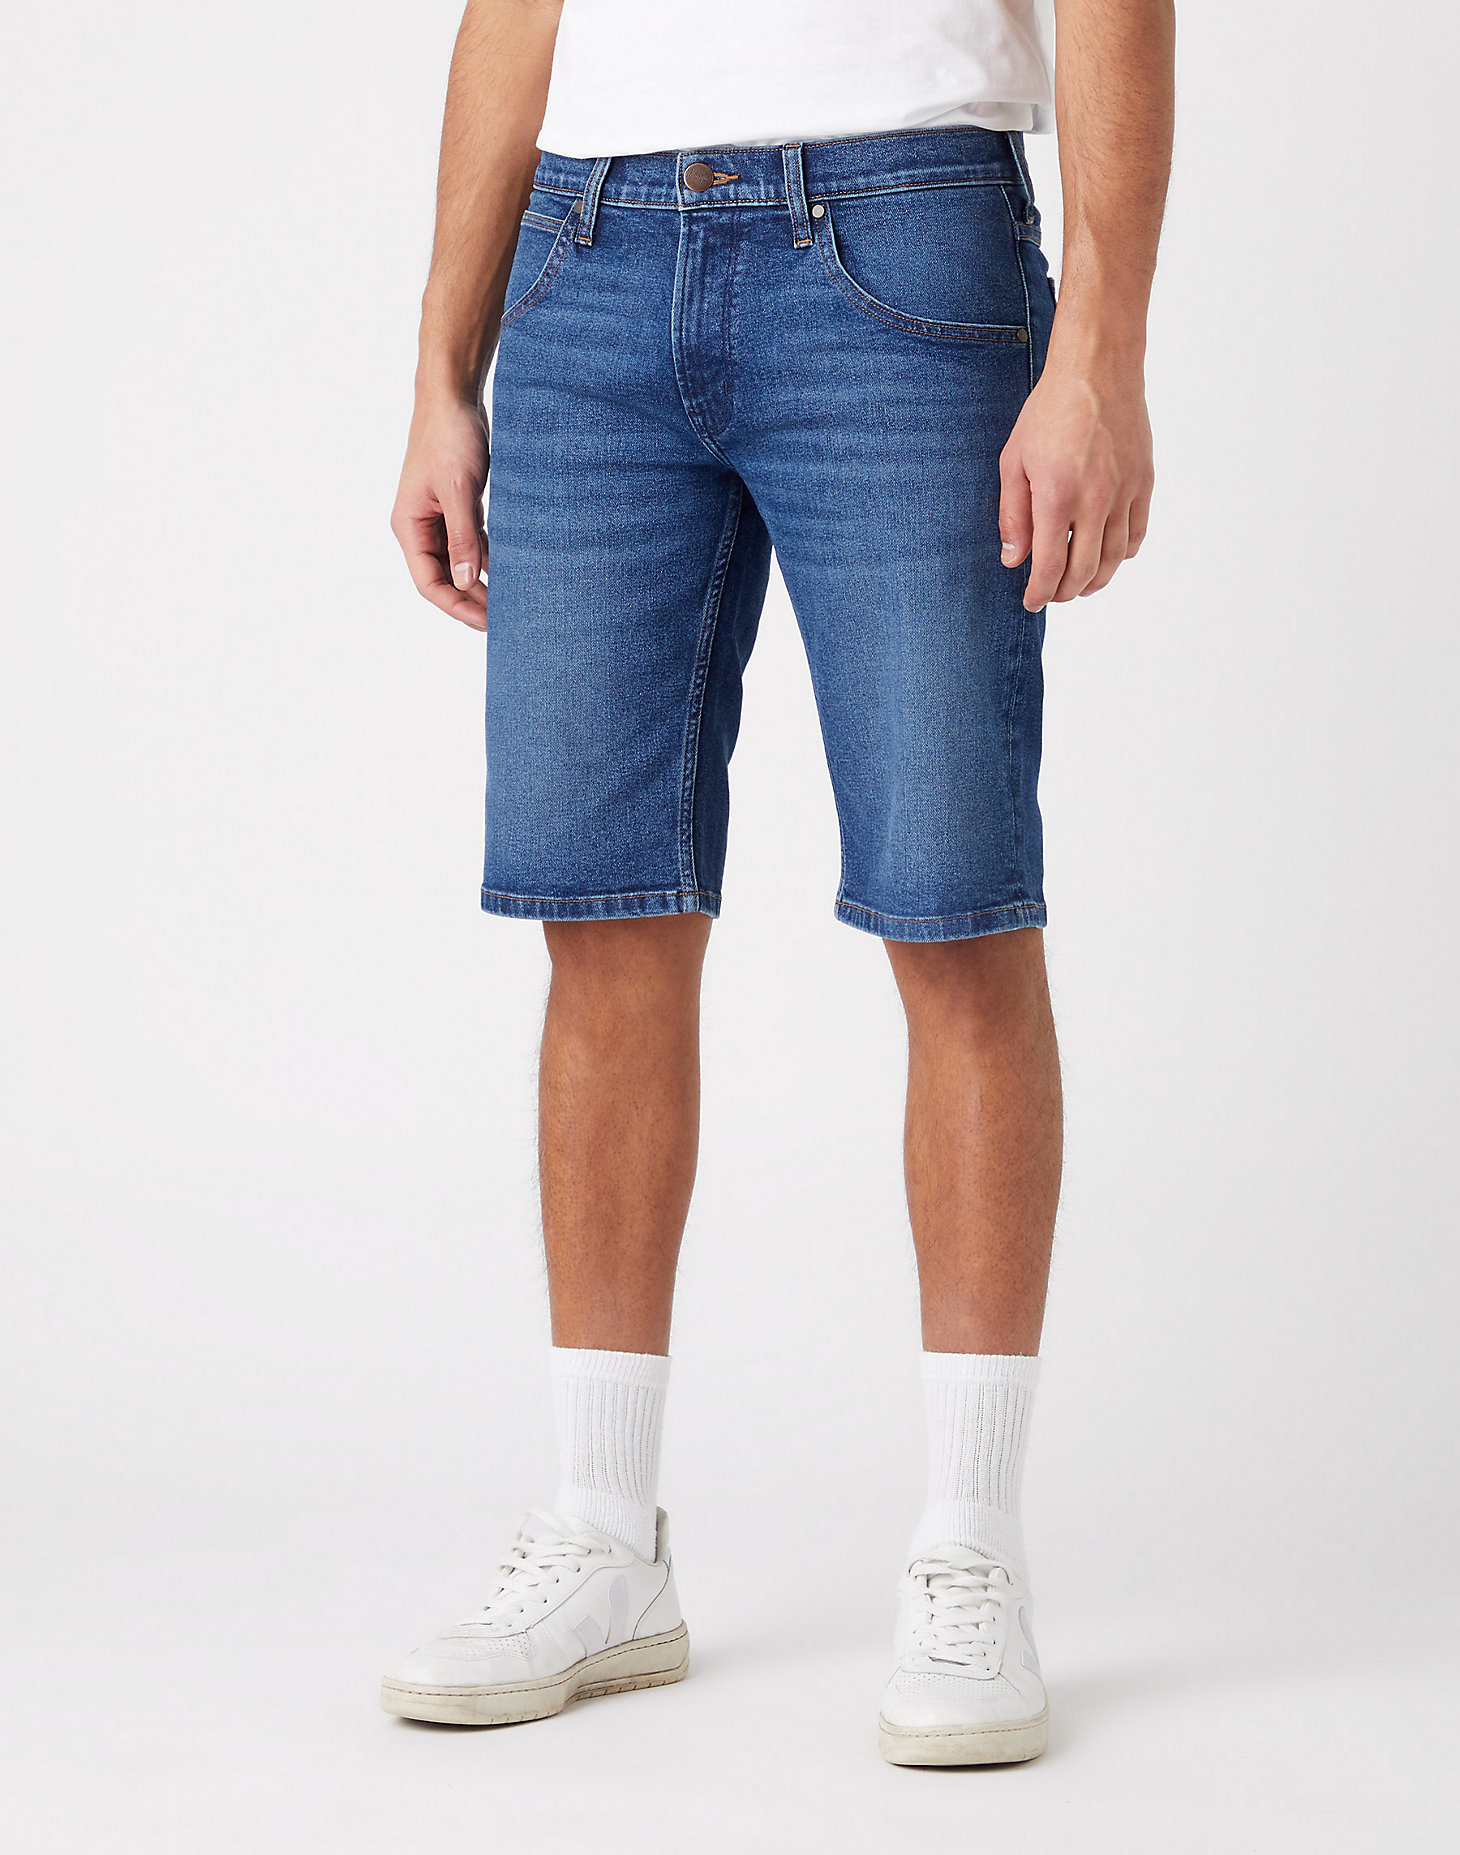 Colton Shorts in Blue Arcade main view